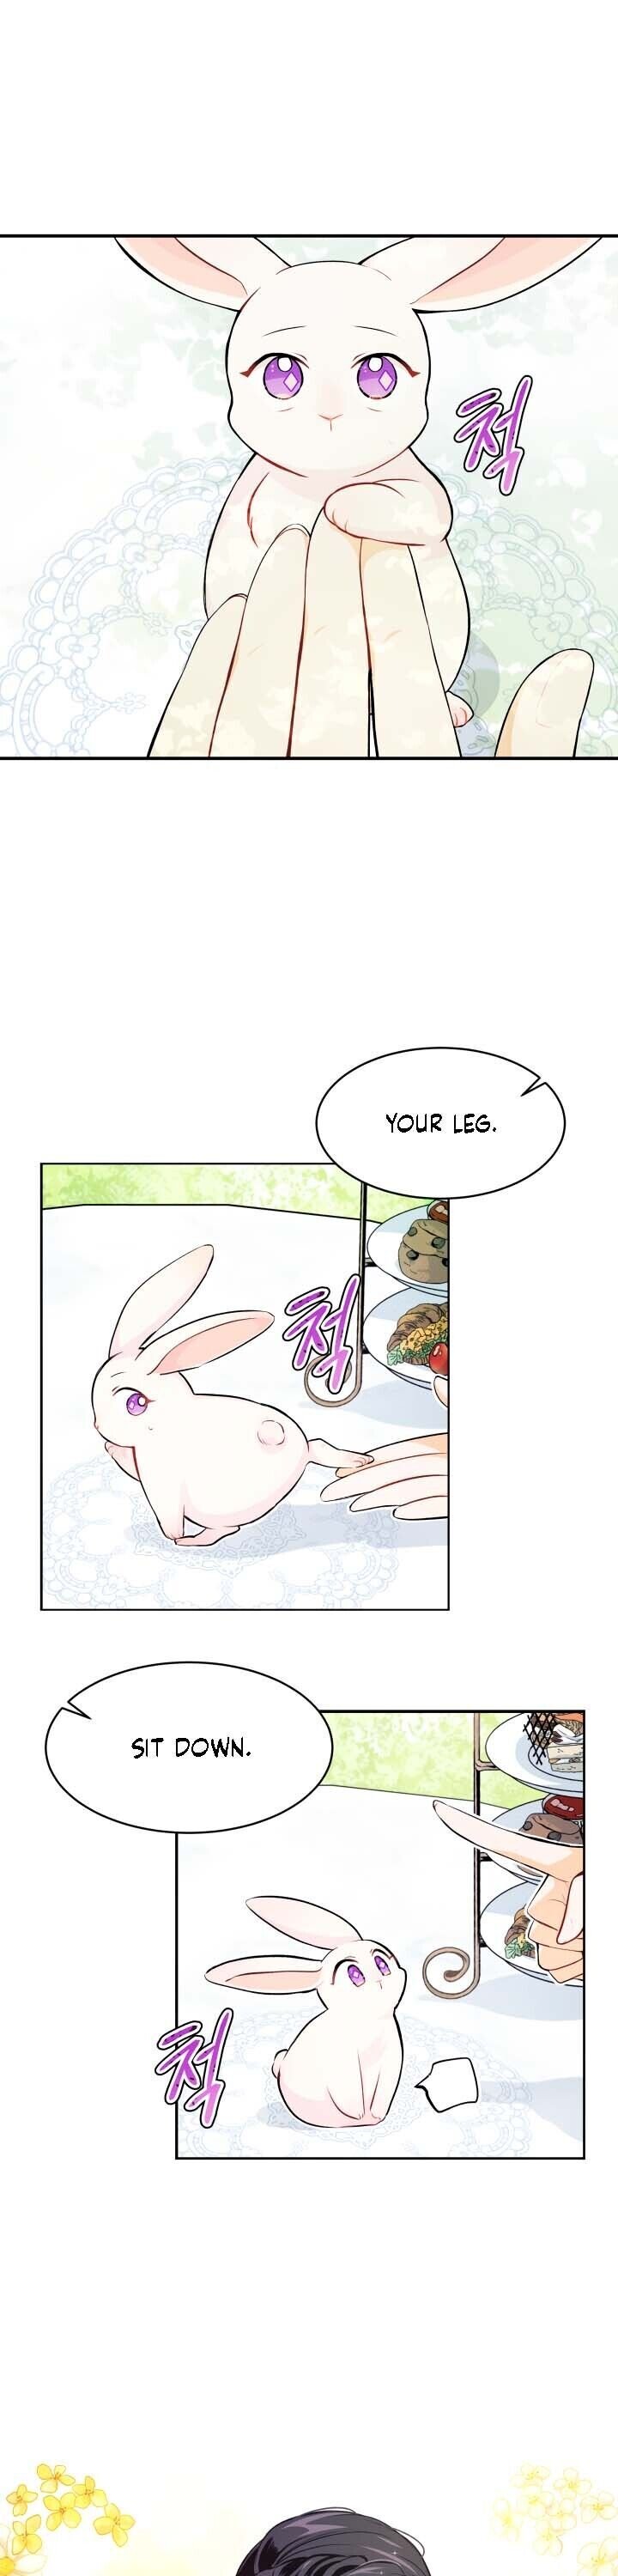 A Symbiotic Relationship Between A Rabbit And A Black Panther Chapter 5 - Page 5